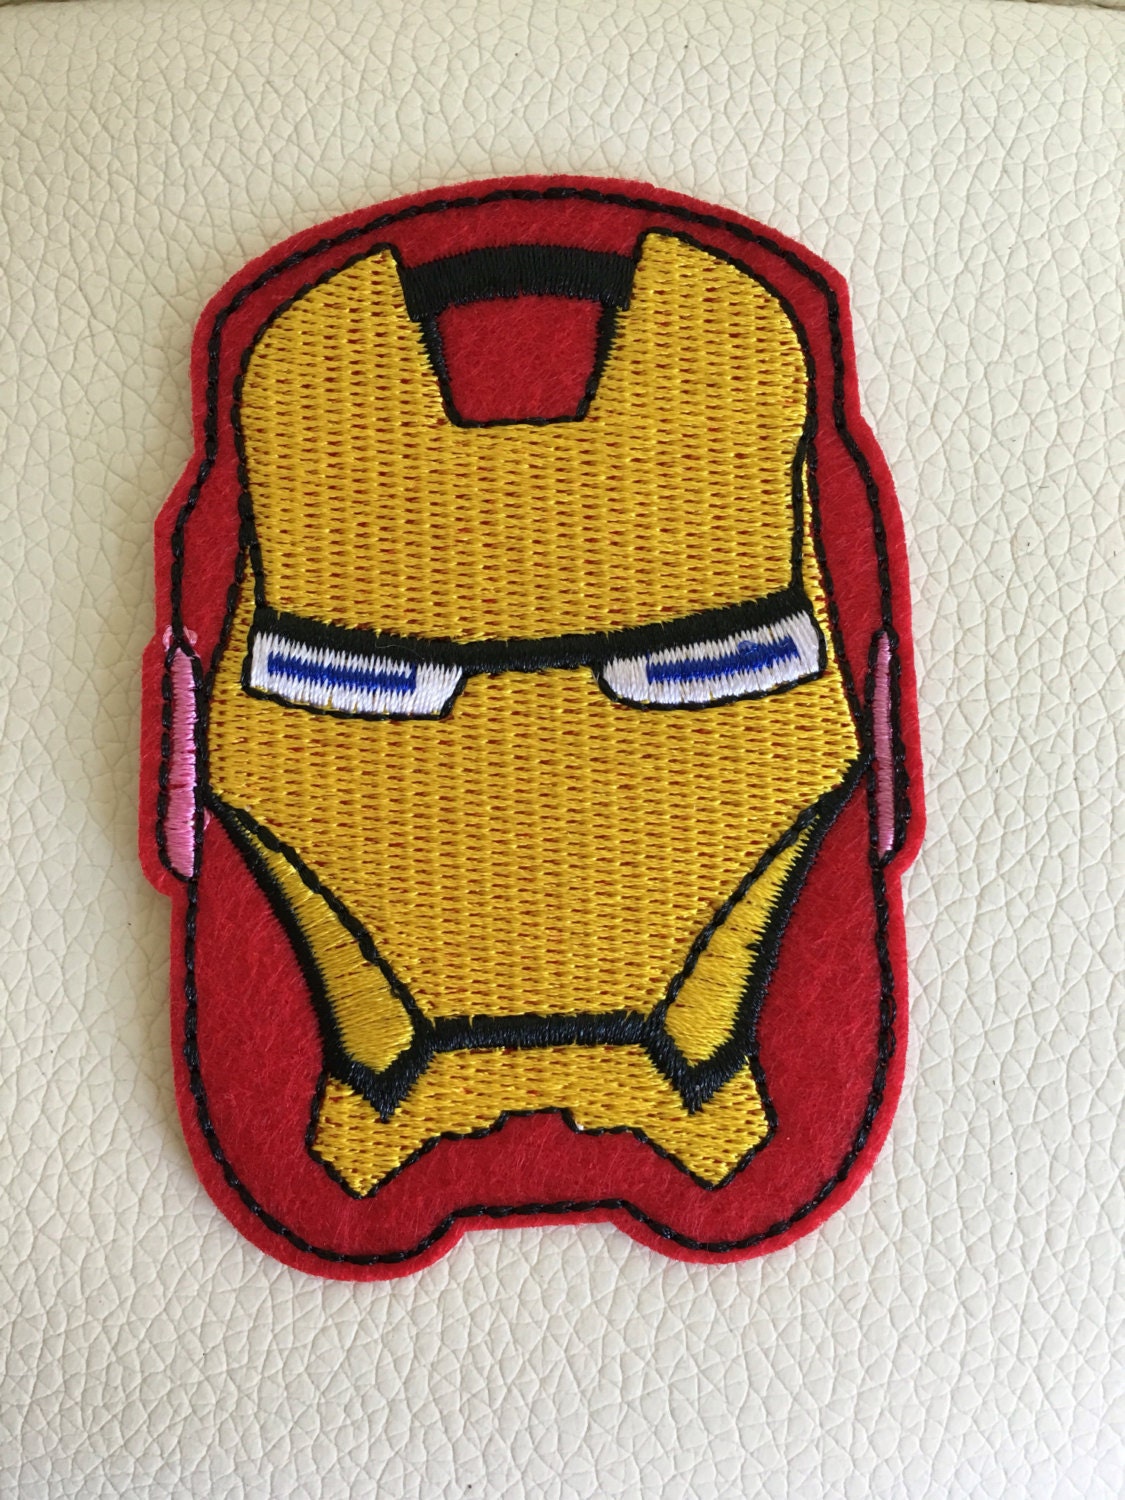 IRON MAN sew/iron on embroidered patch by ElliotsplaceCrafts